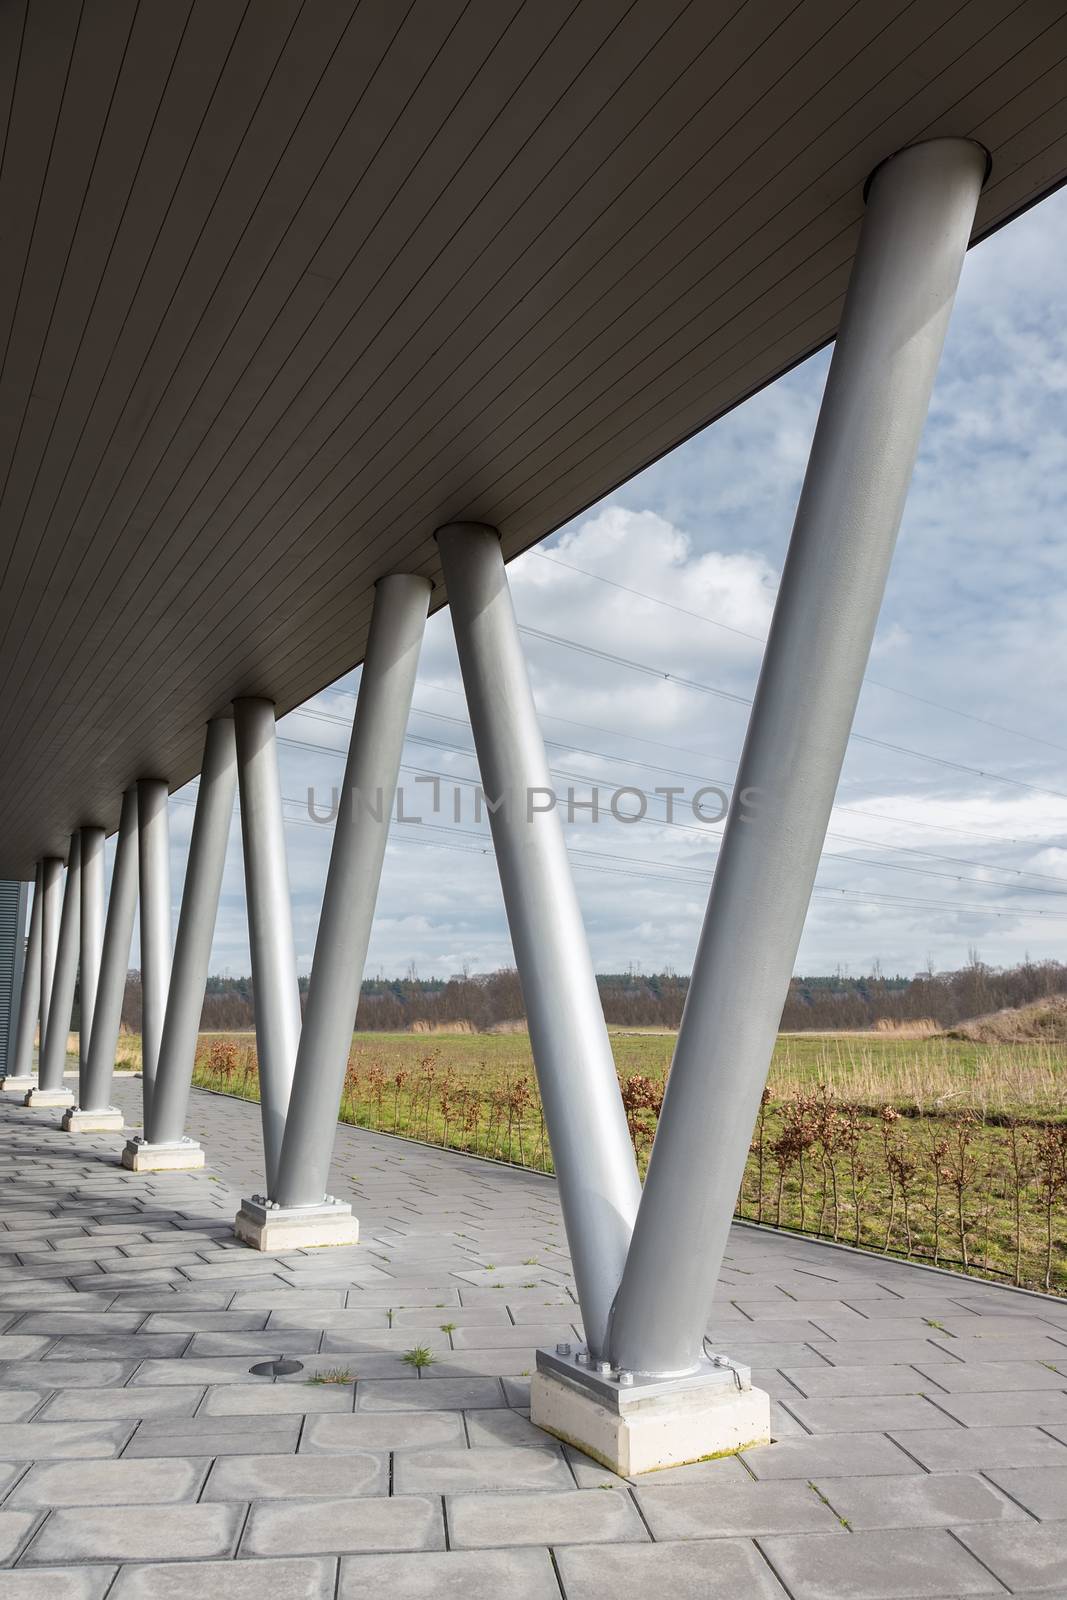 V- shaped metal pillars as construction under roof of building